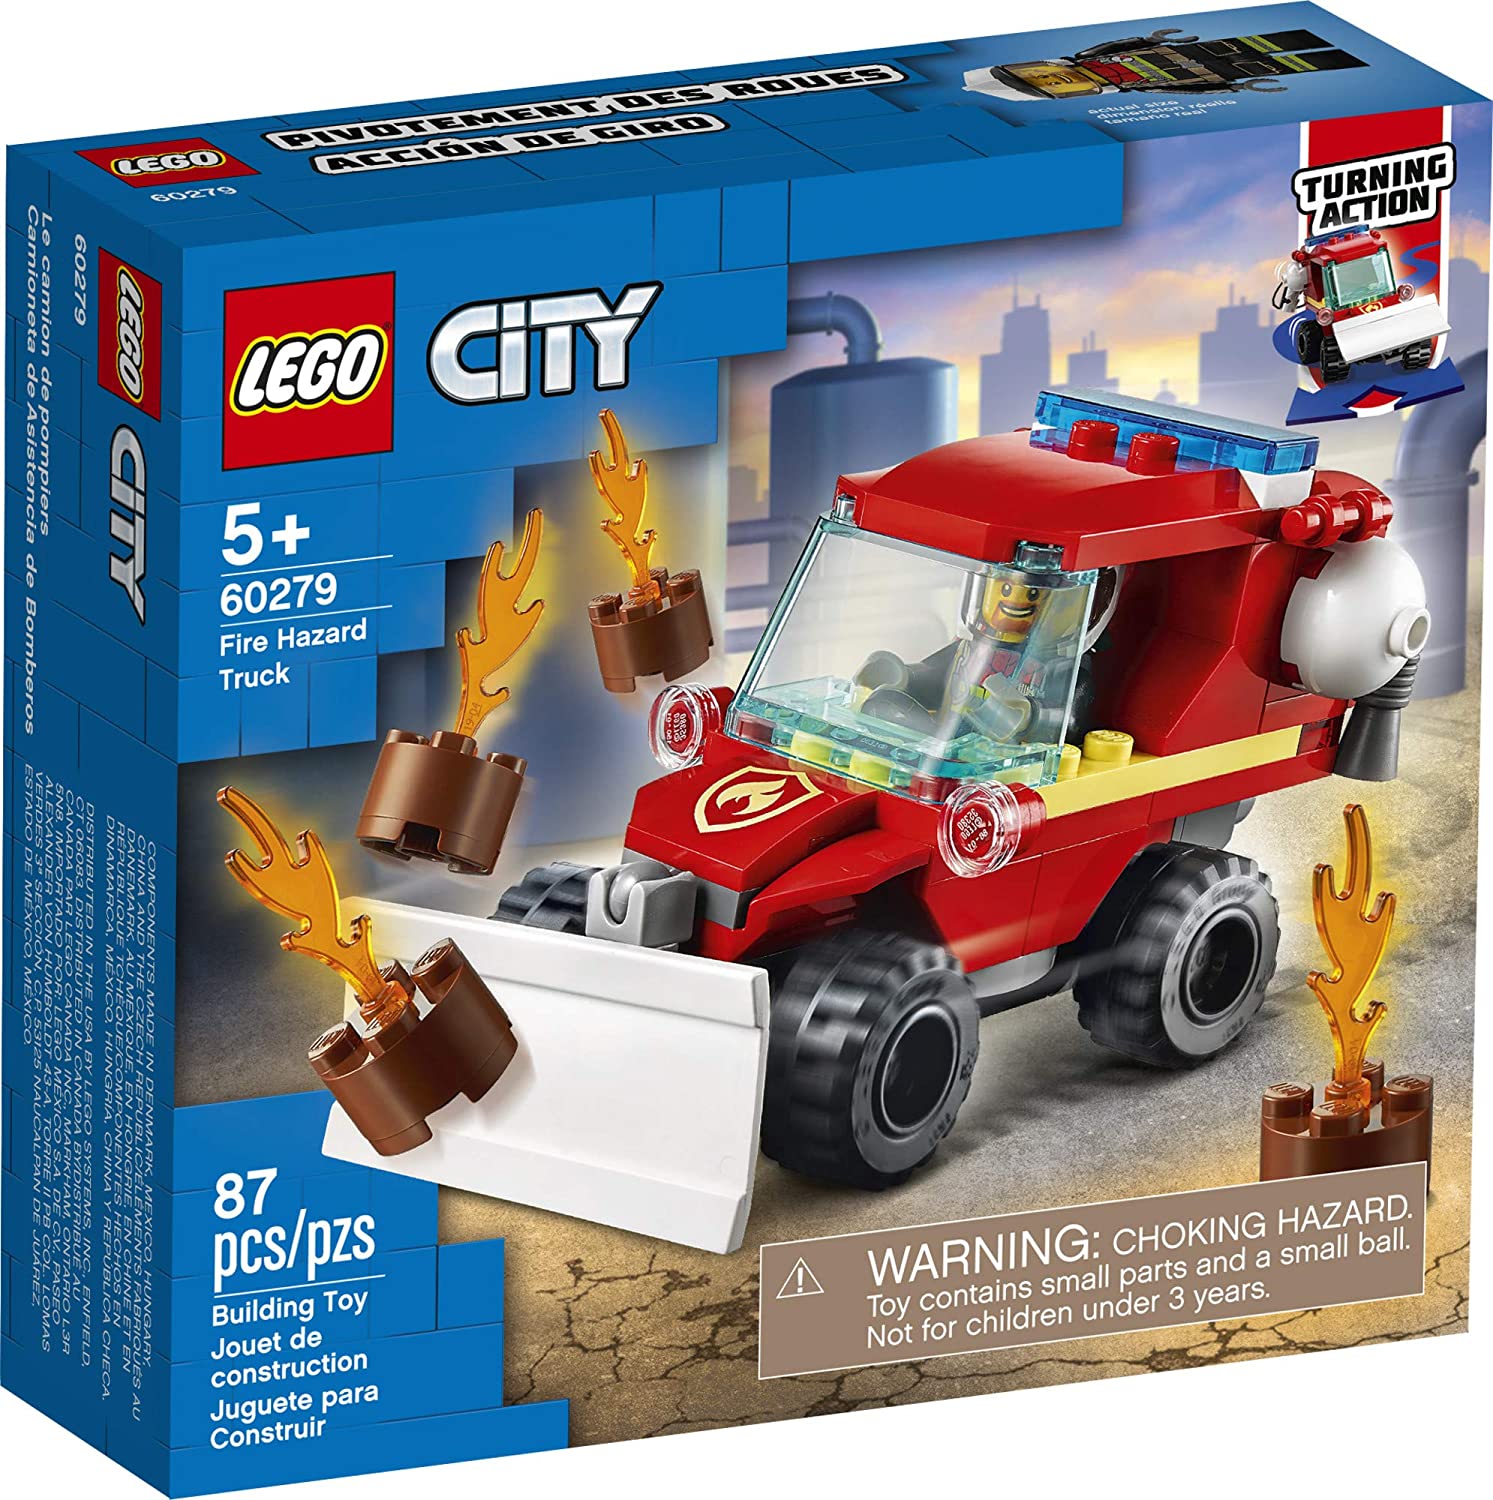 LEGO City Fire Hazard Truck 60279 Building Kit; Firefighter Toy That Makes a Cool Building Toy for Kids, New 2021 (87 Pieces) - image 5 of 8